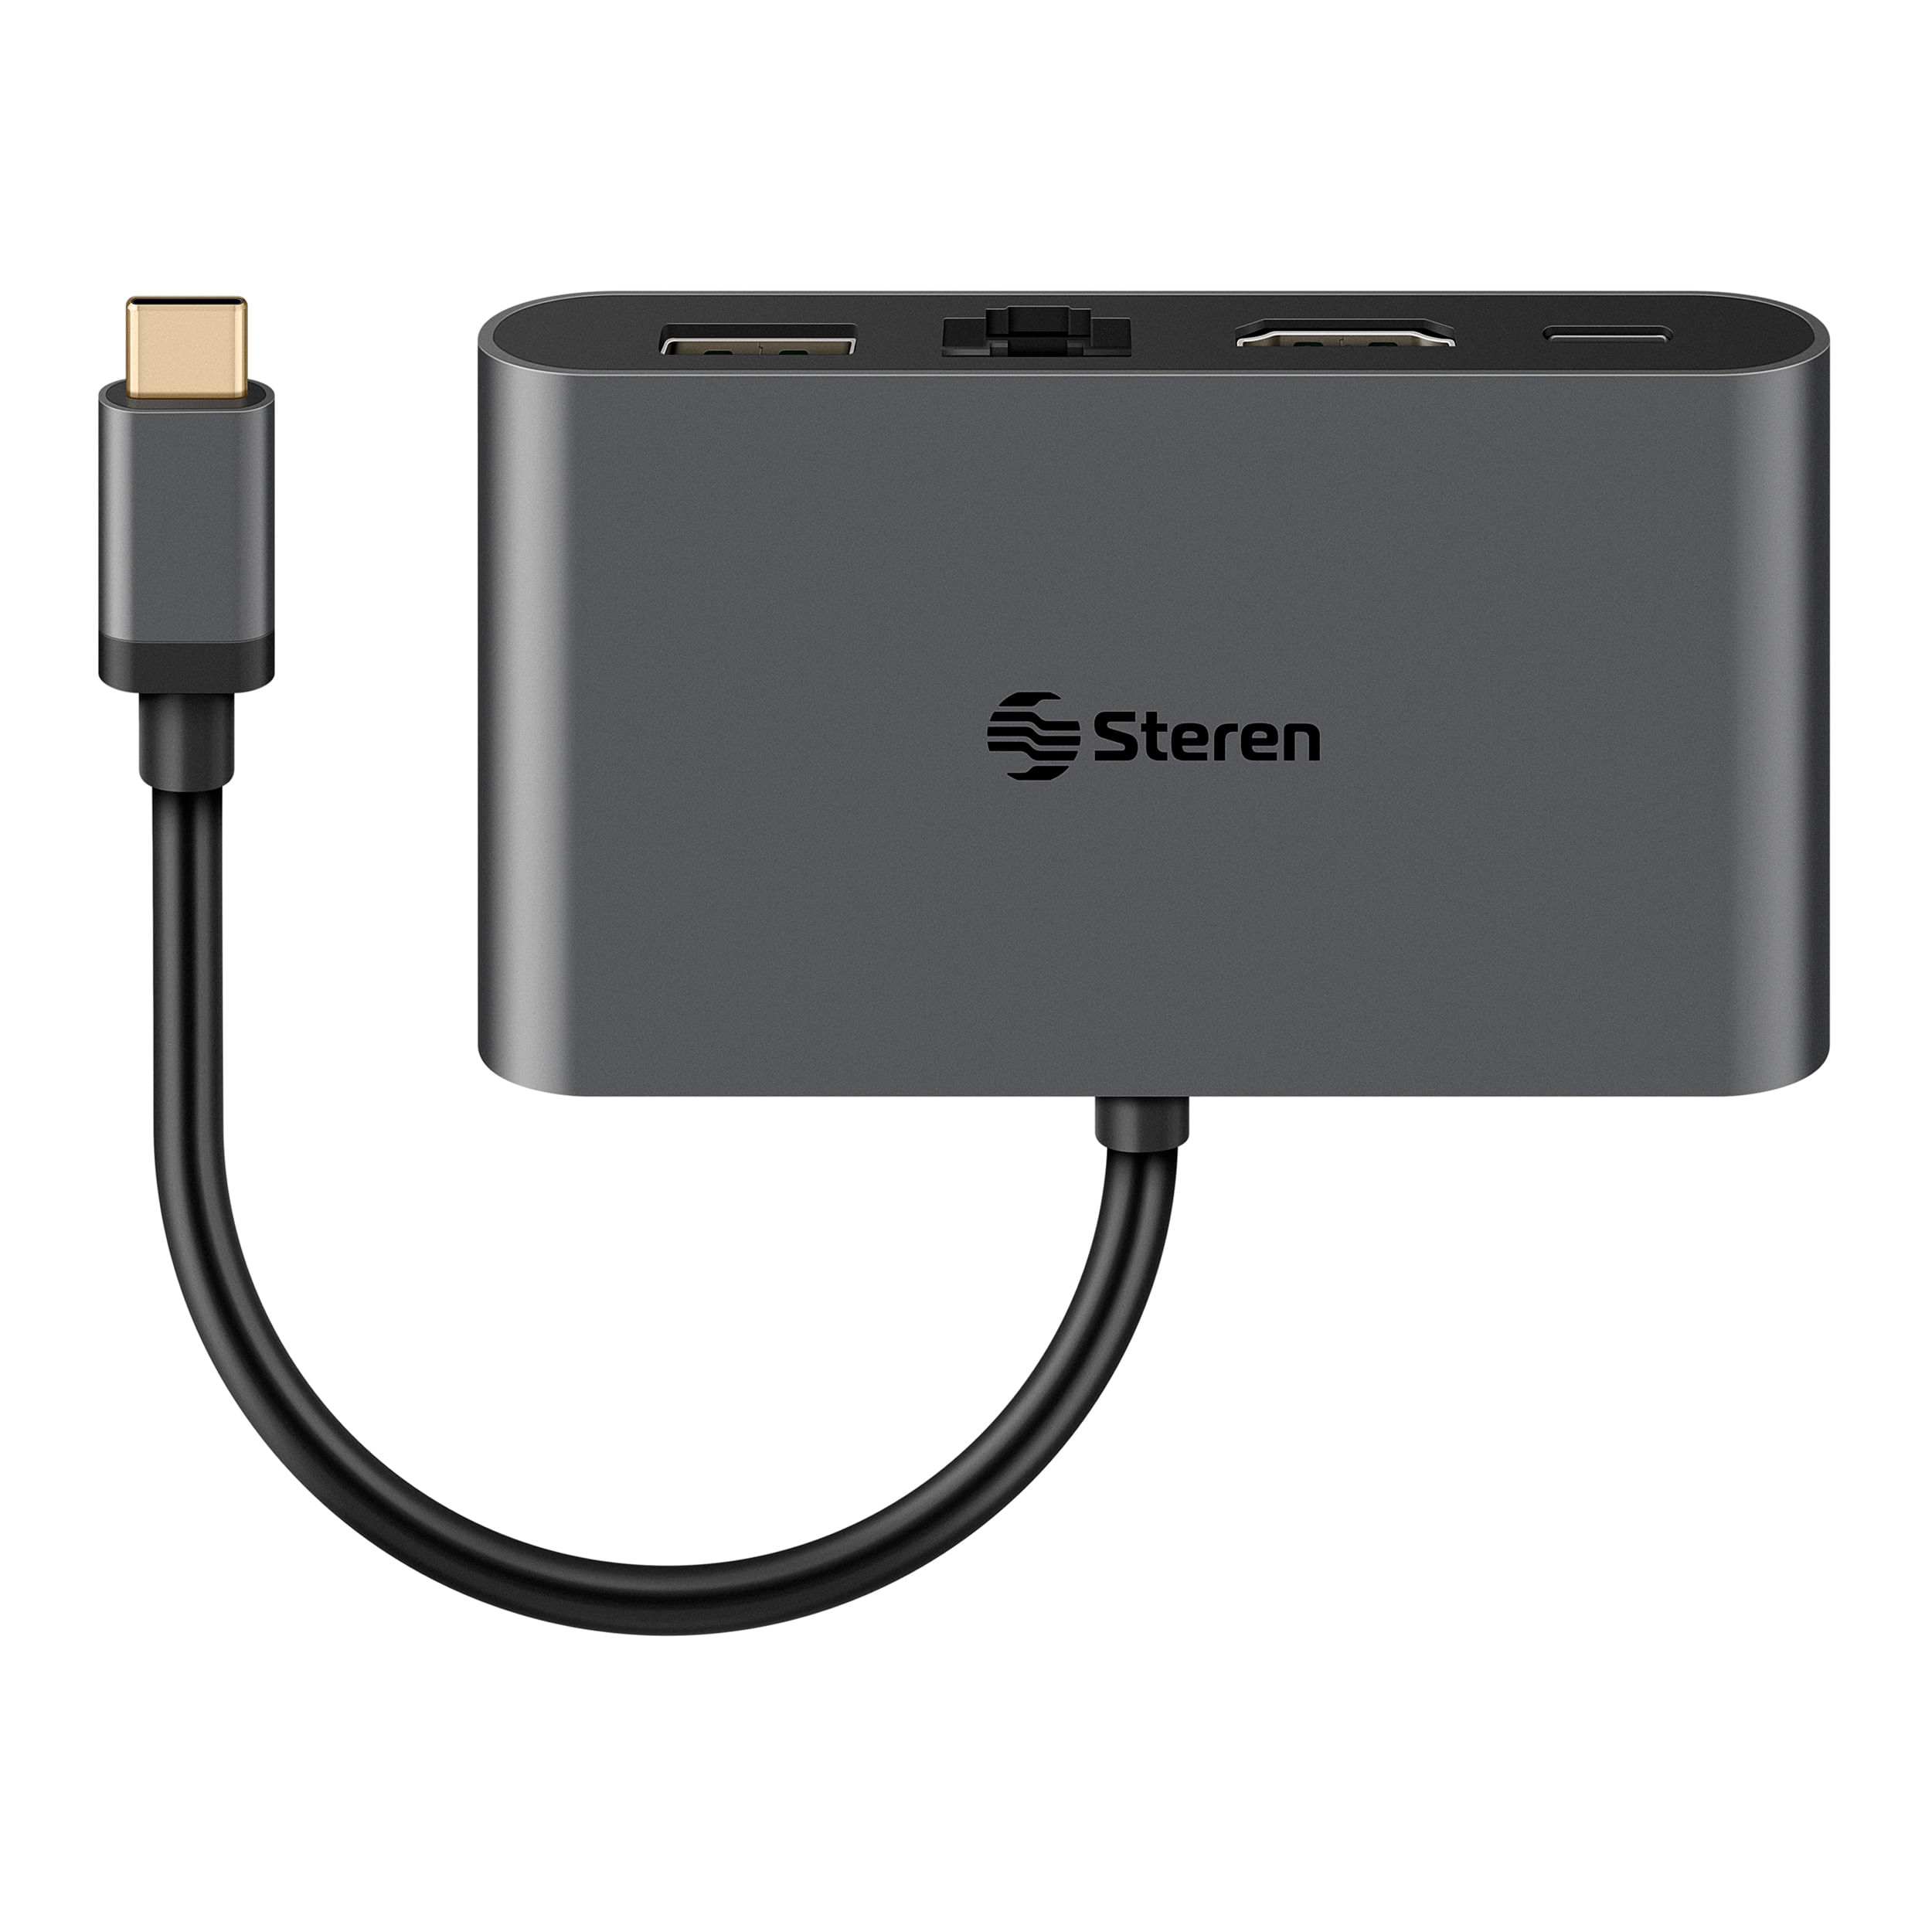 Cable USB C a HDMI contramarcado iCenter – iCenter Colombia